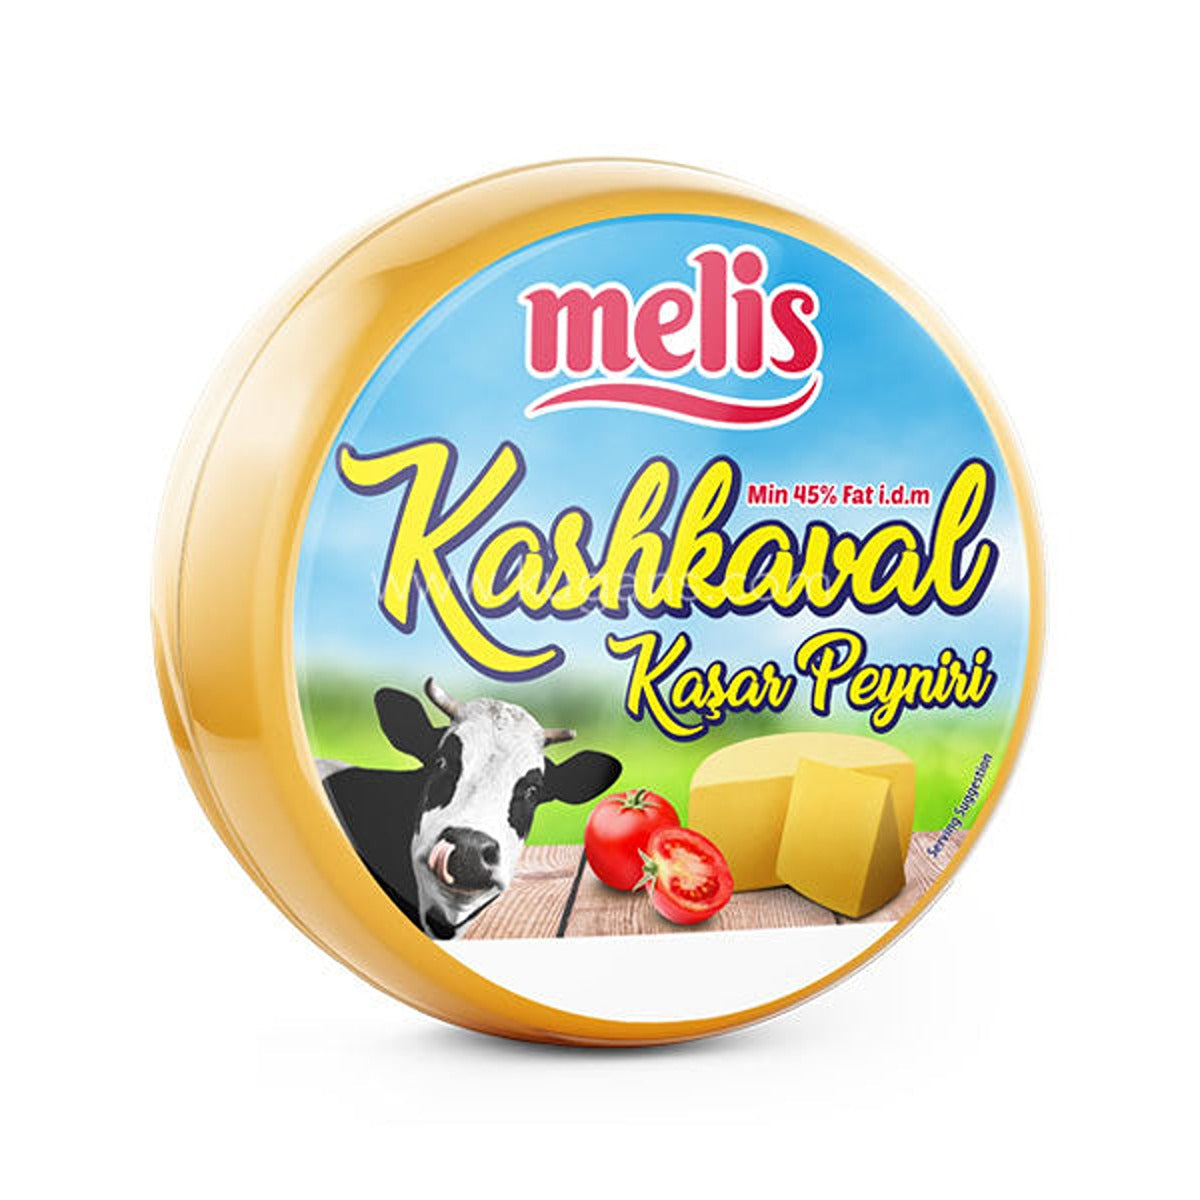 Round cheese package labeled "Melis - Kashkaval (Kasar) Cheddar Cheese - 400g" with an image of a cow, cheese, and tomatoes on the label.